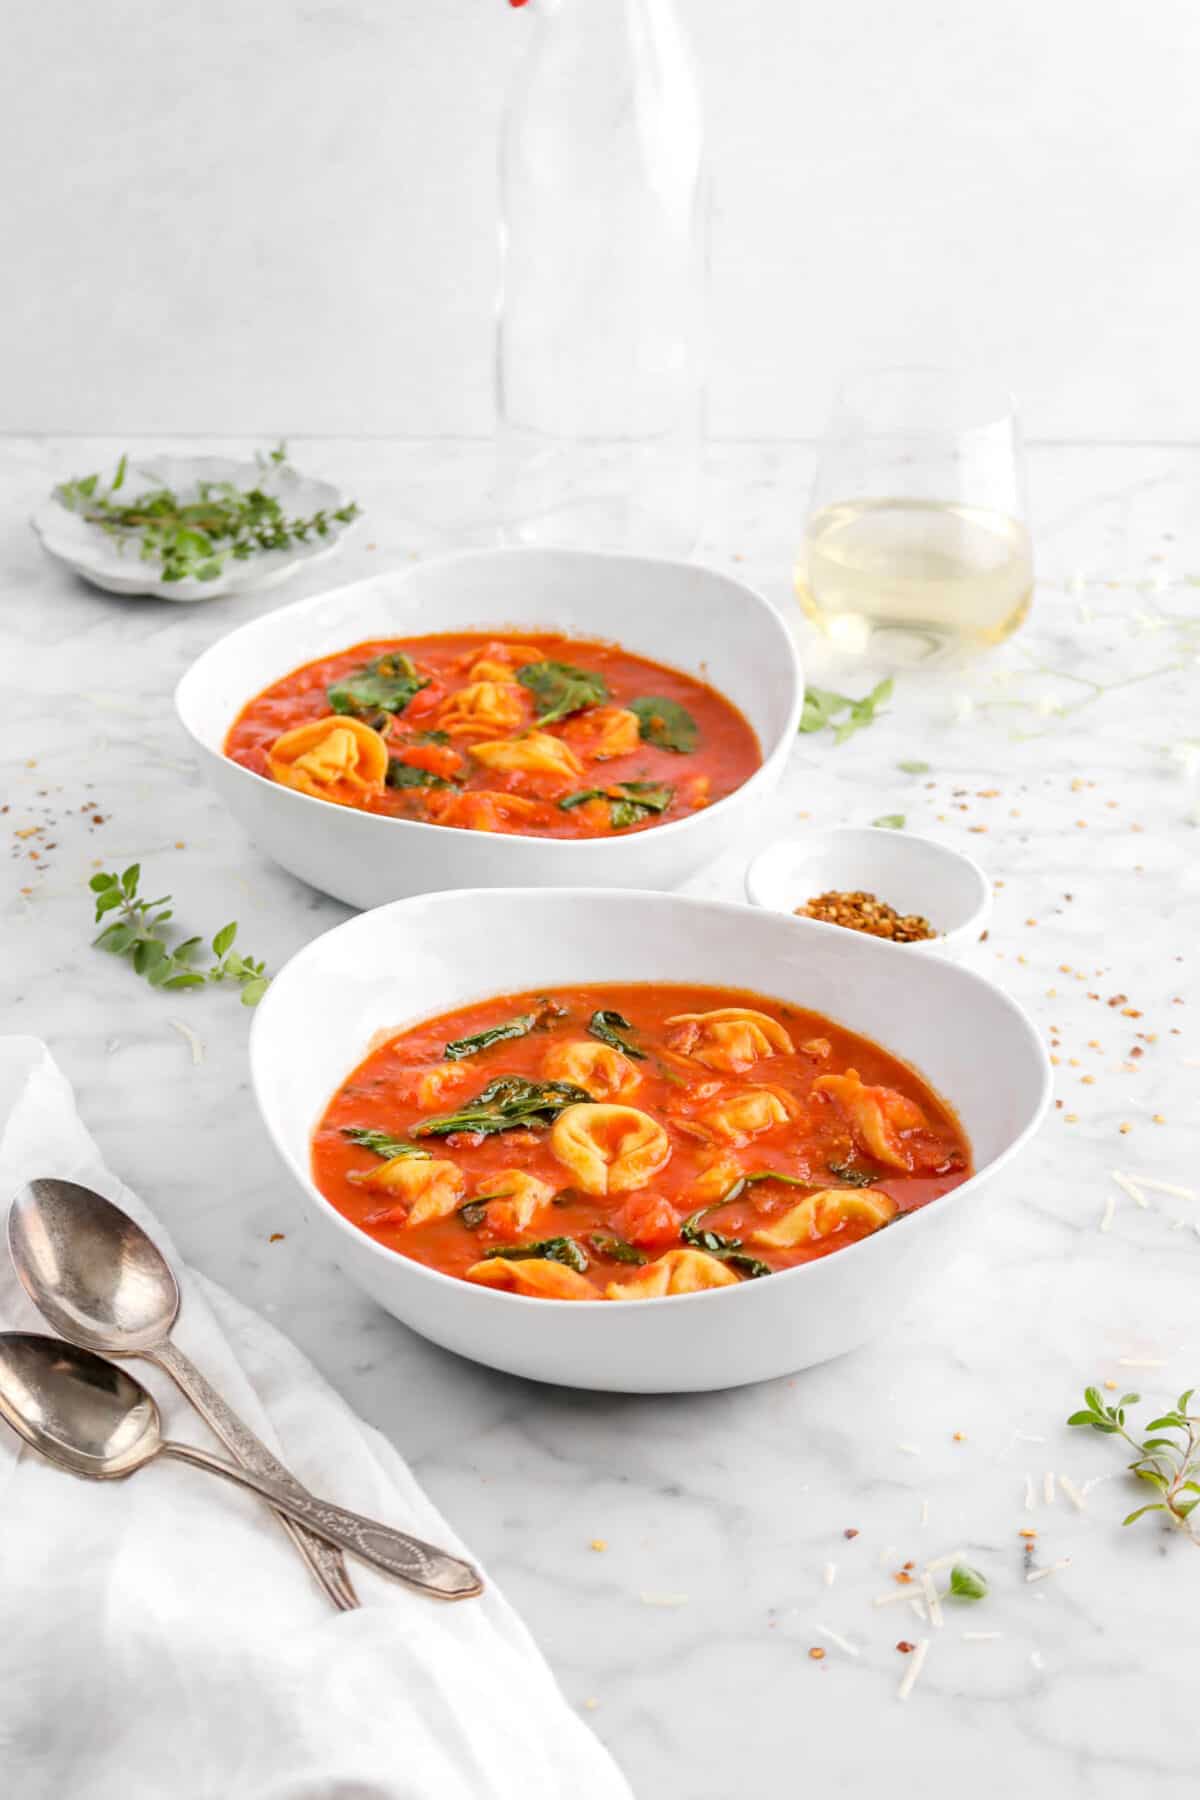 two bowls of tomato tortellini soup on counter with two spoons with fresh herbs, glass of wine, and red pepper flakes around